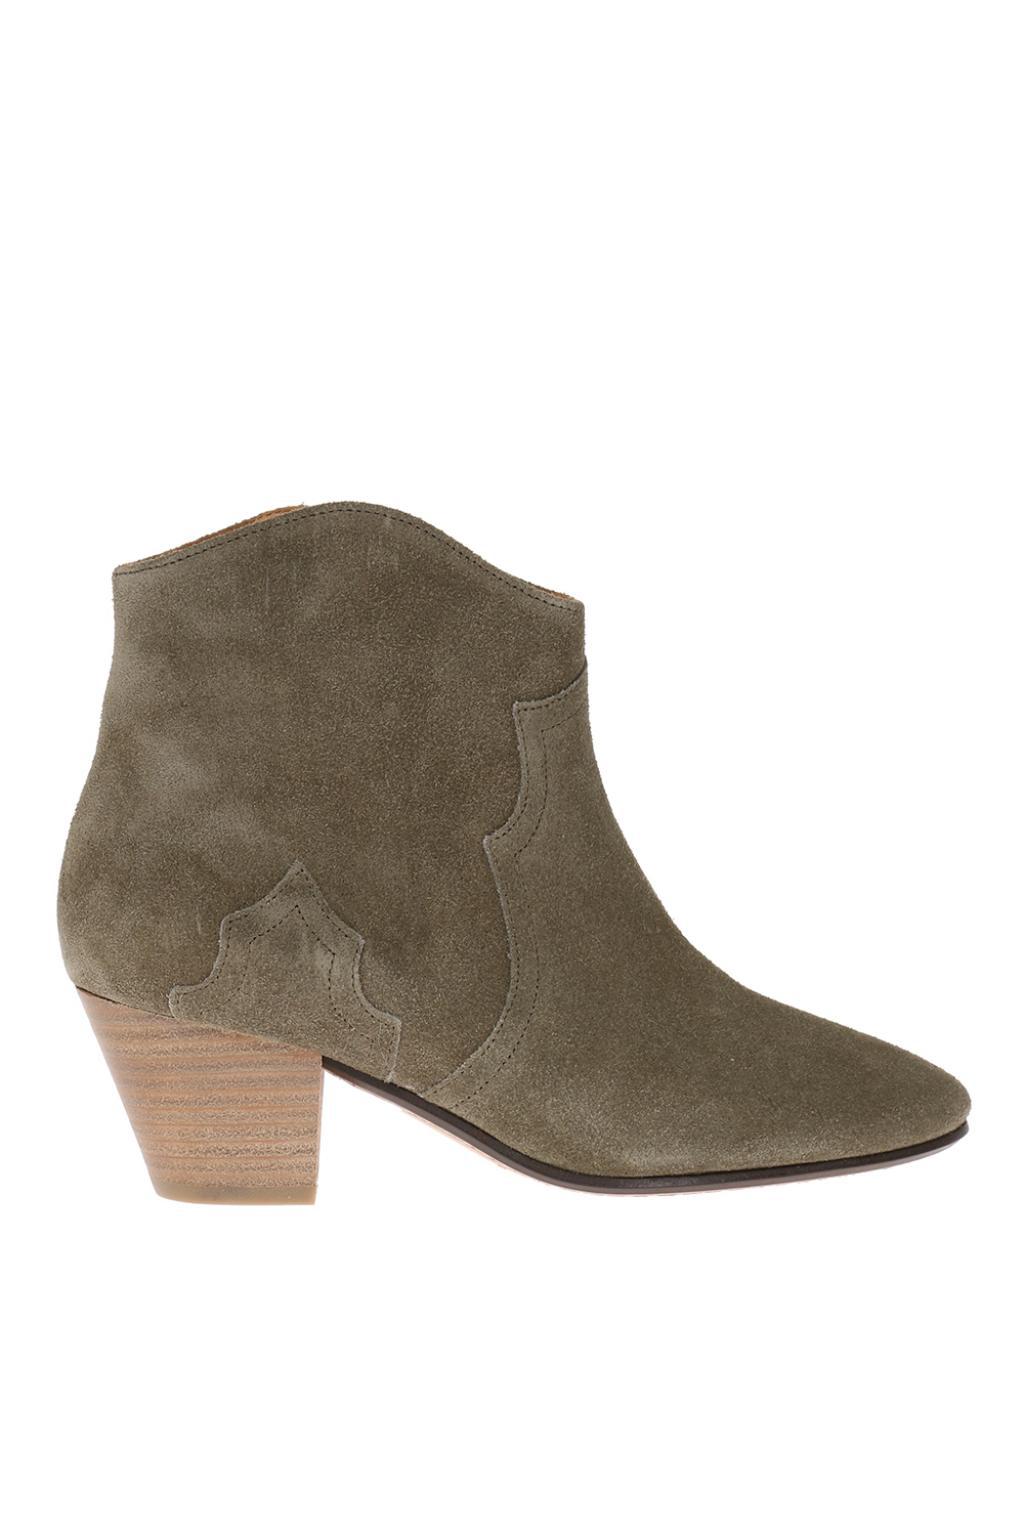 Isabel Marant 'dicker' Suede Ankle Boots in Green - Lyst